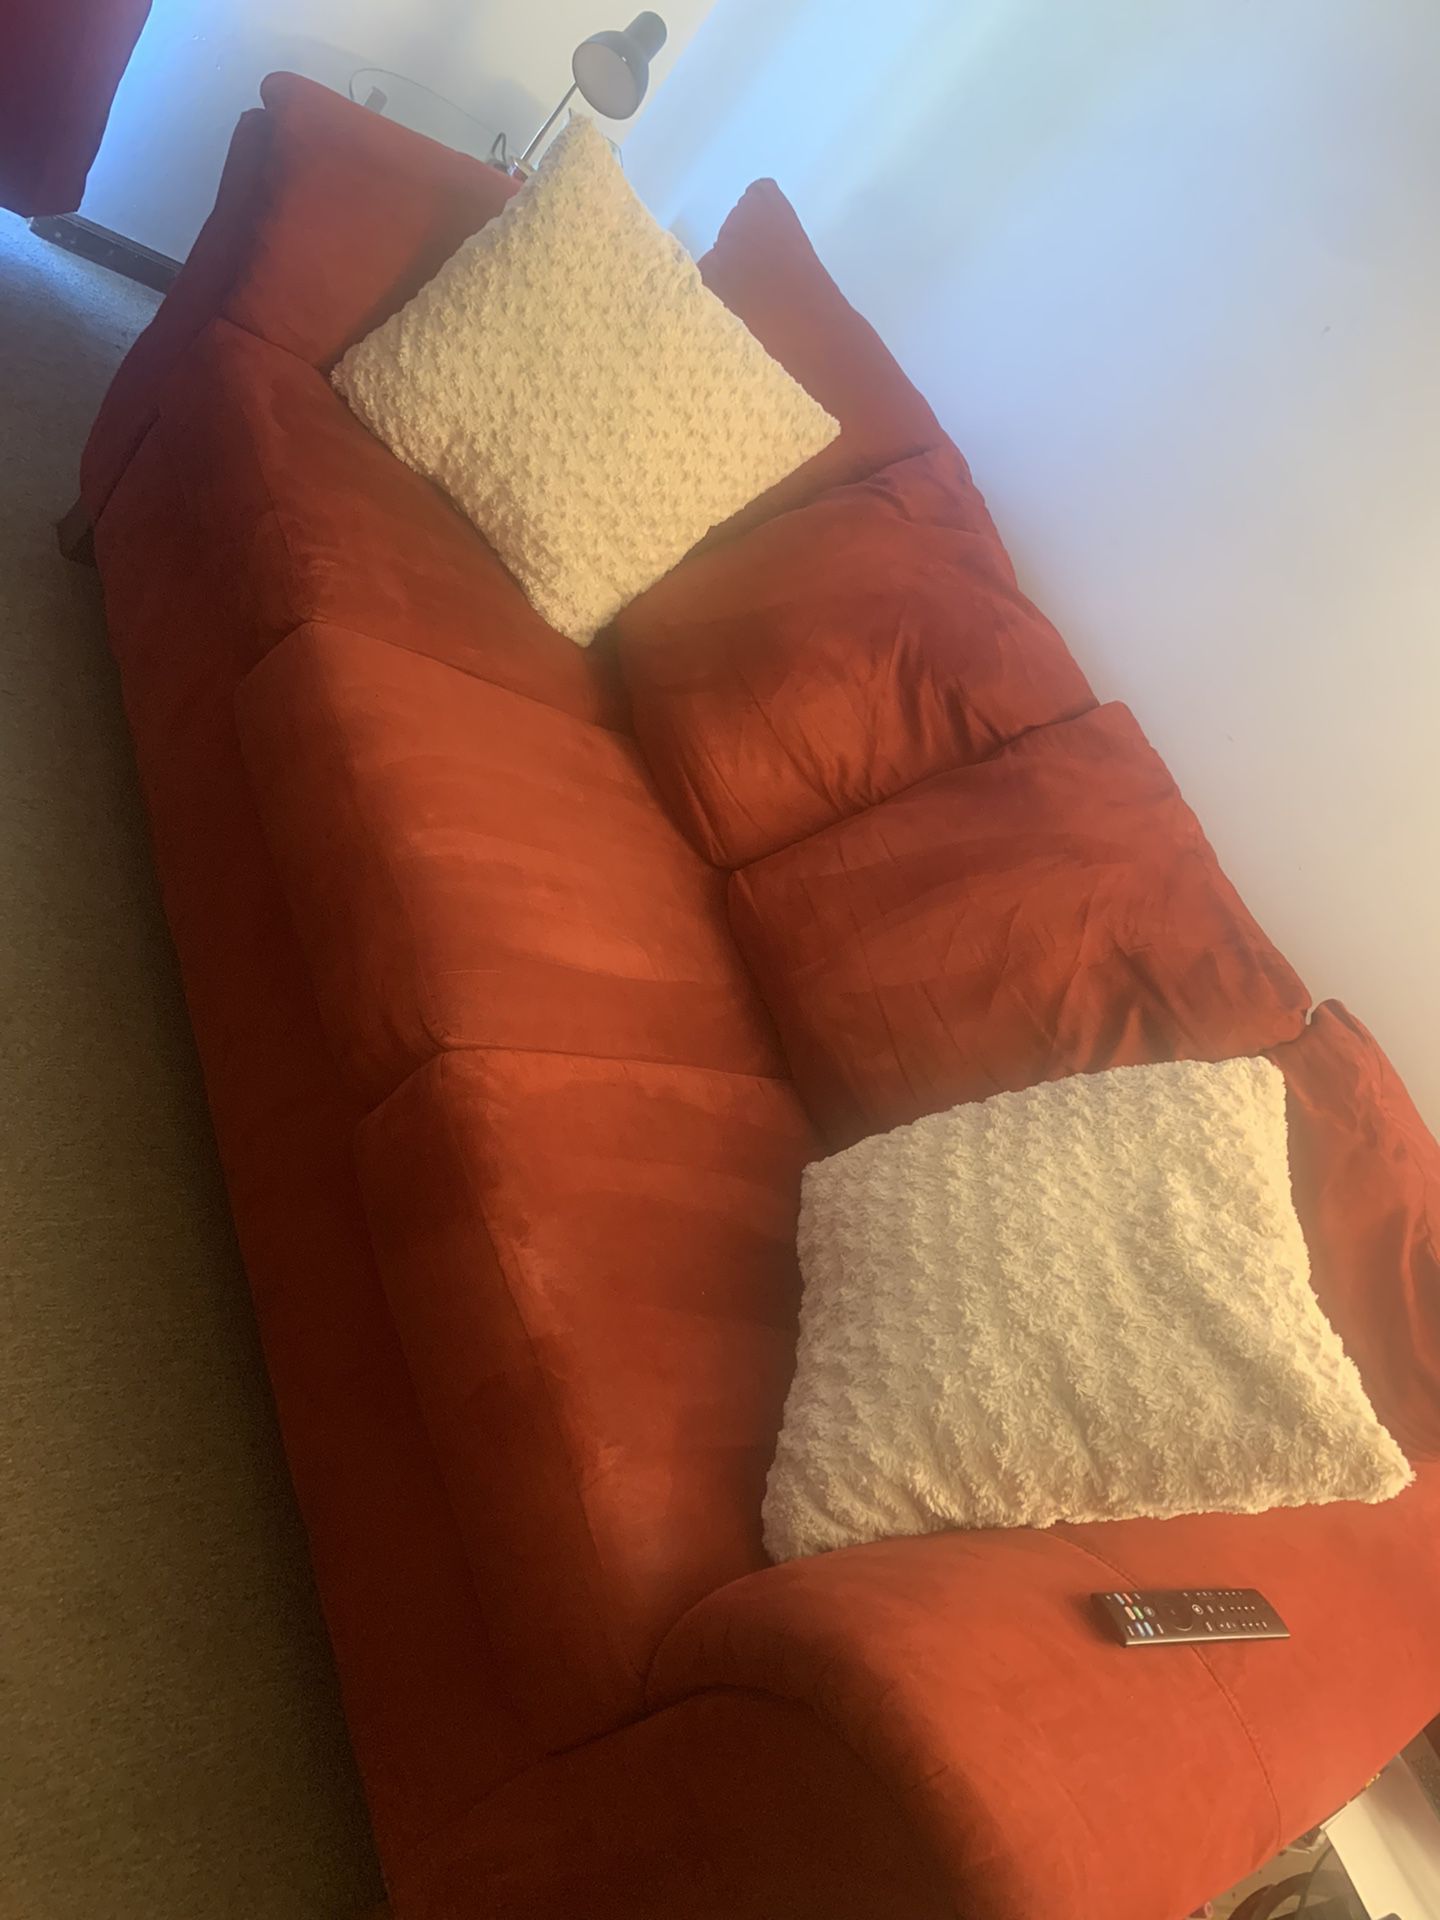 Couch With Pillows